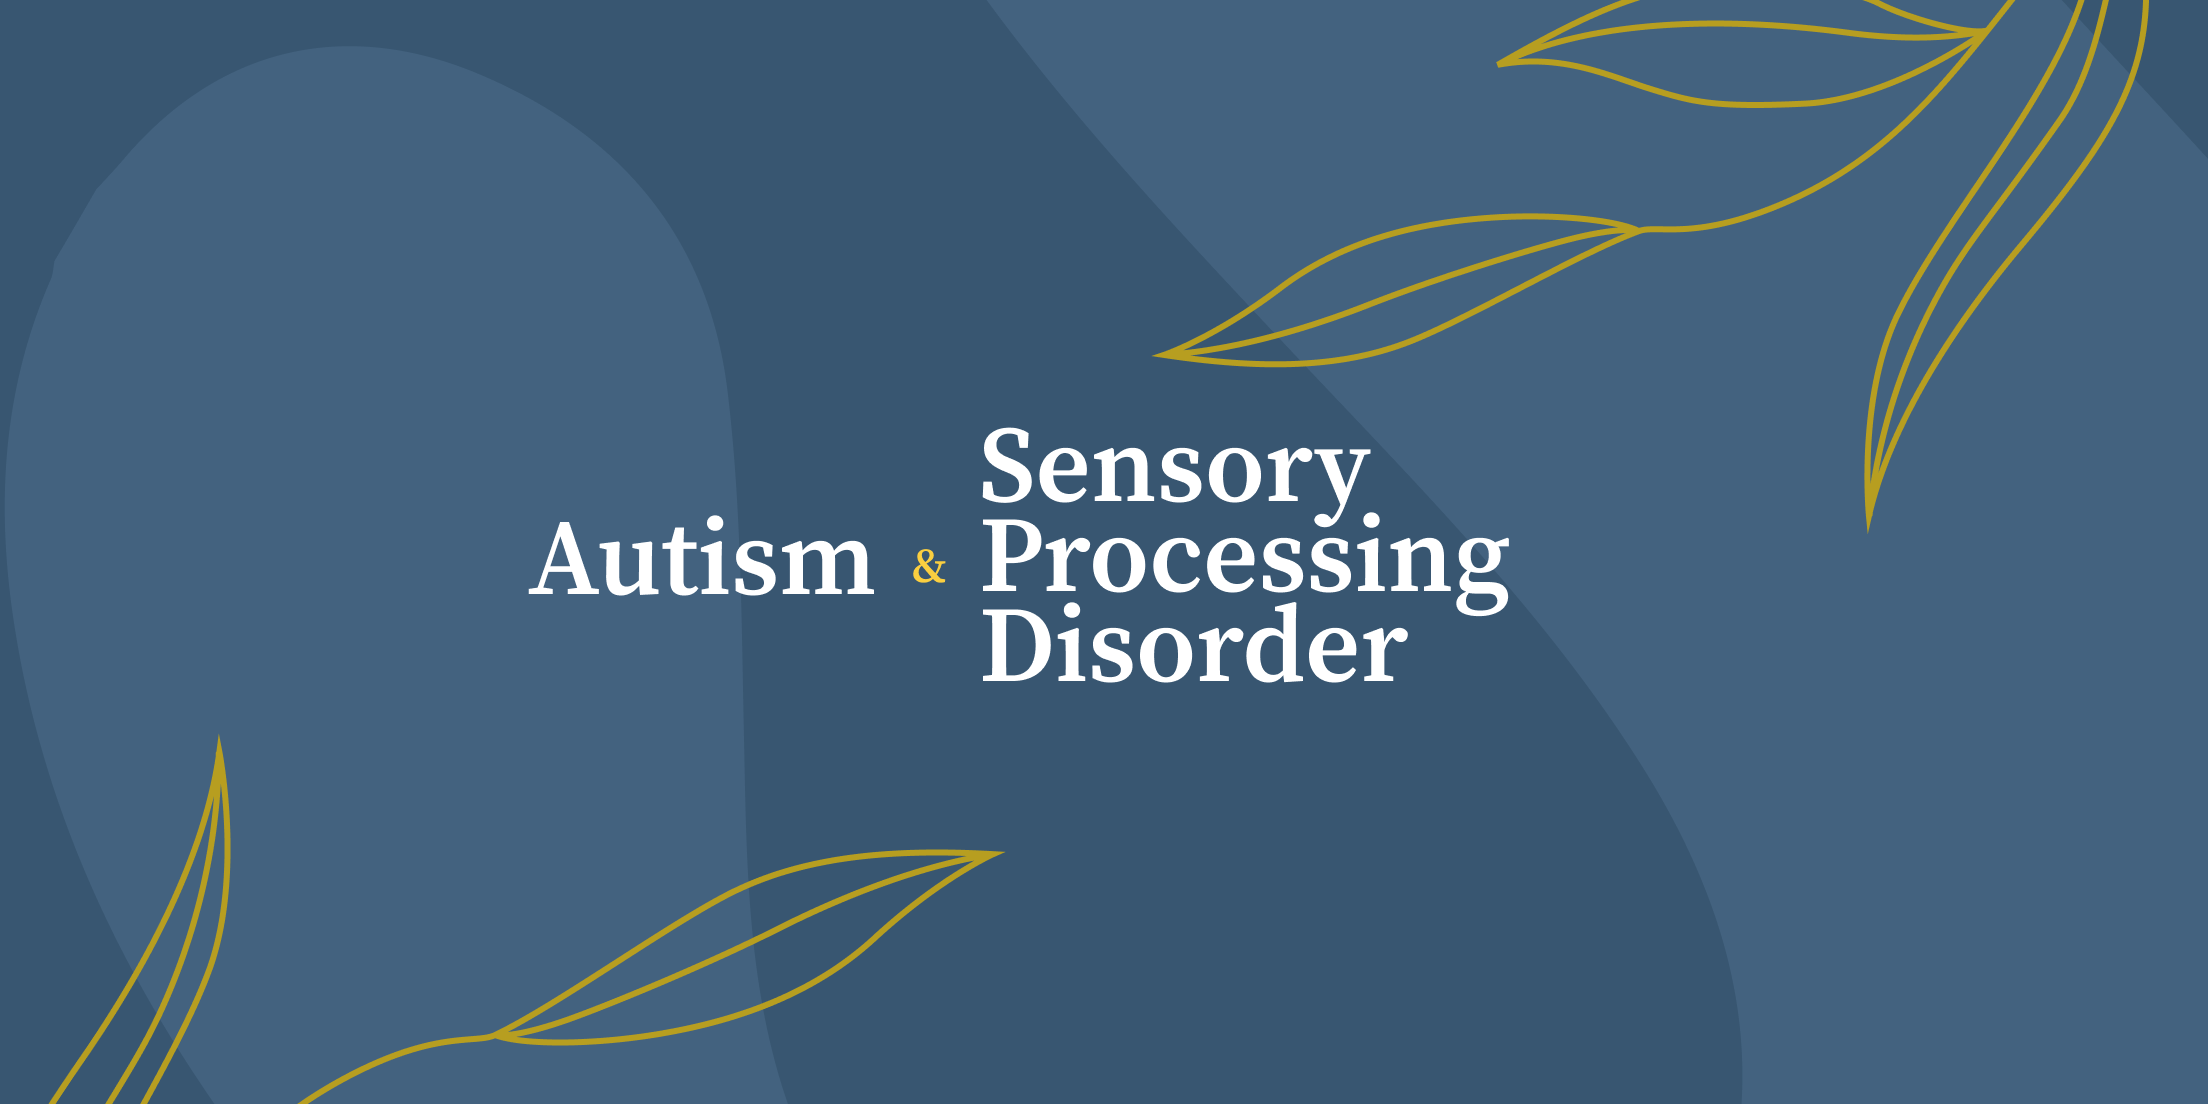 Autism & Sensory Processing Disorder: The Connection